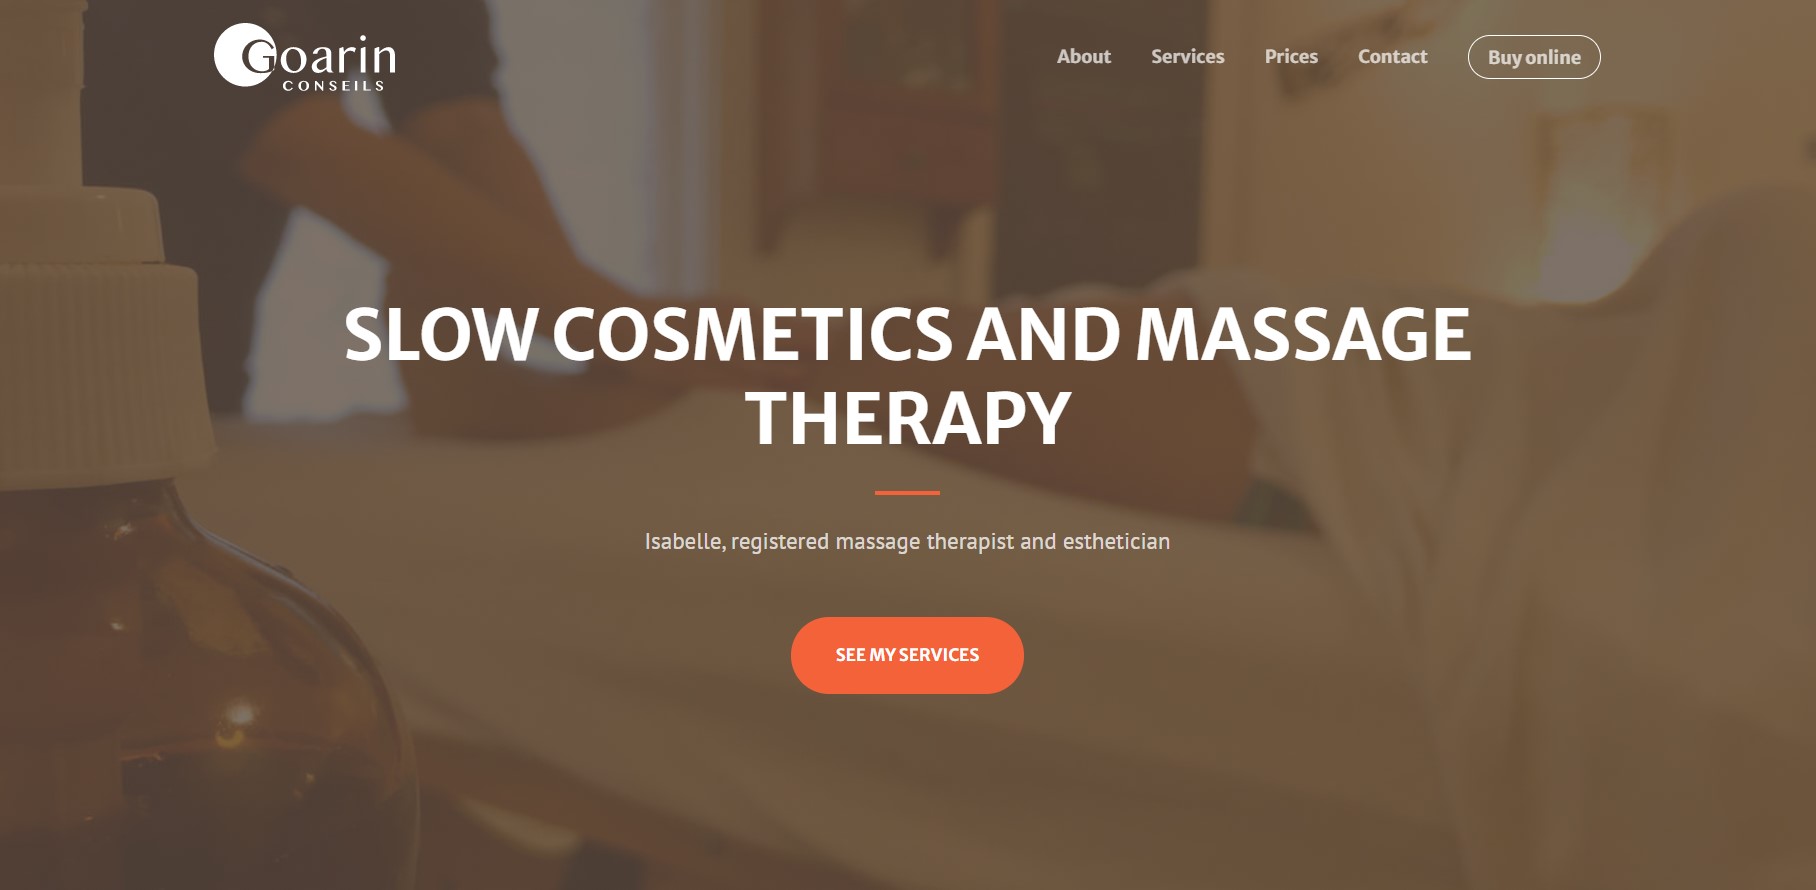 goarin conseils massage therapy spa in quebec